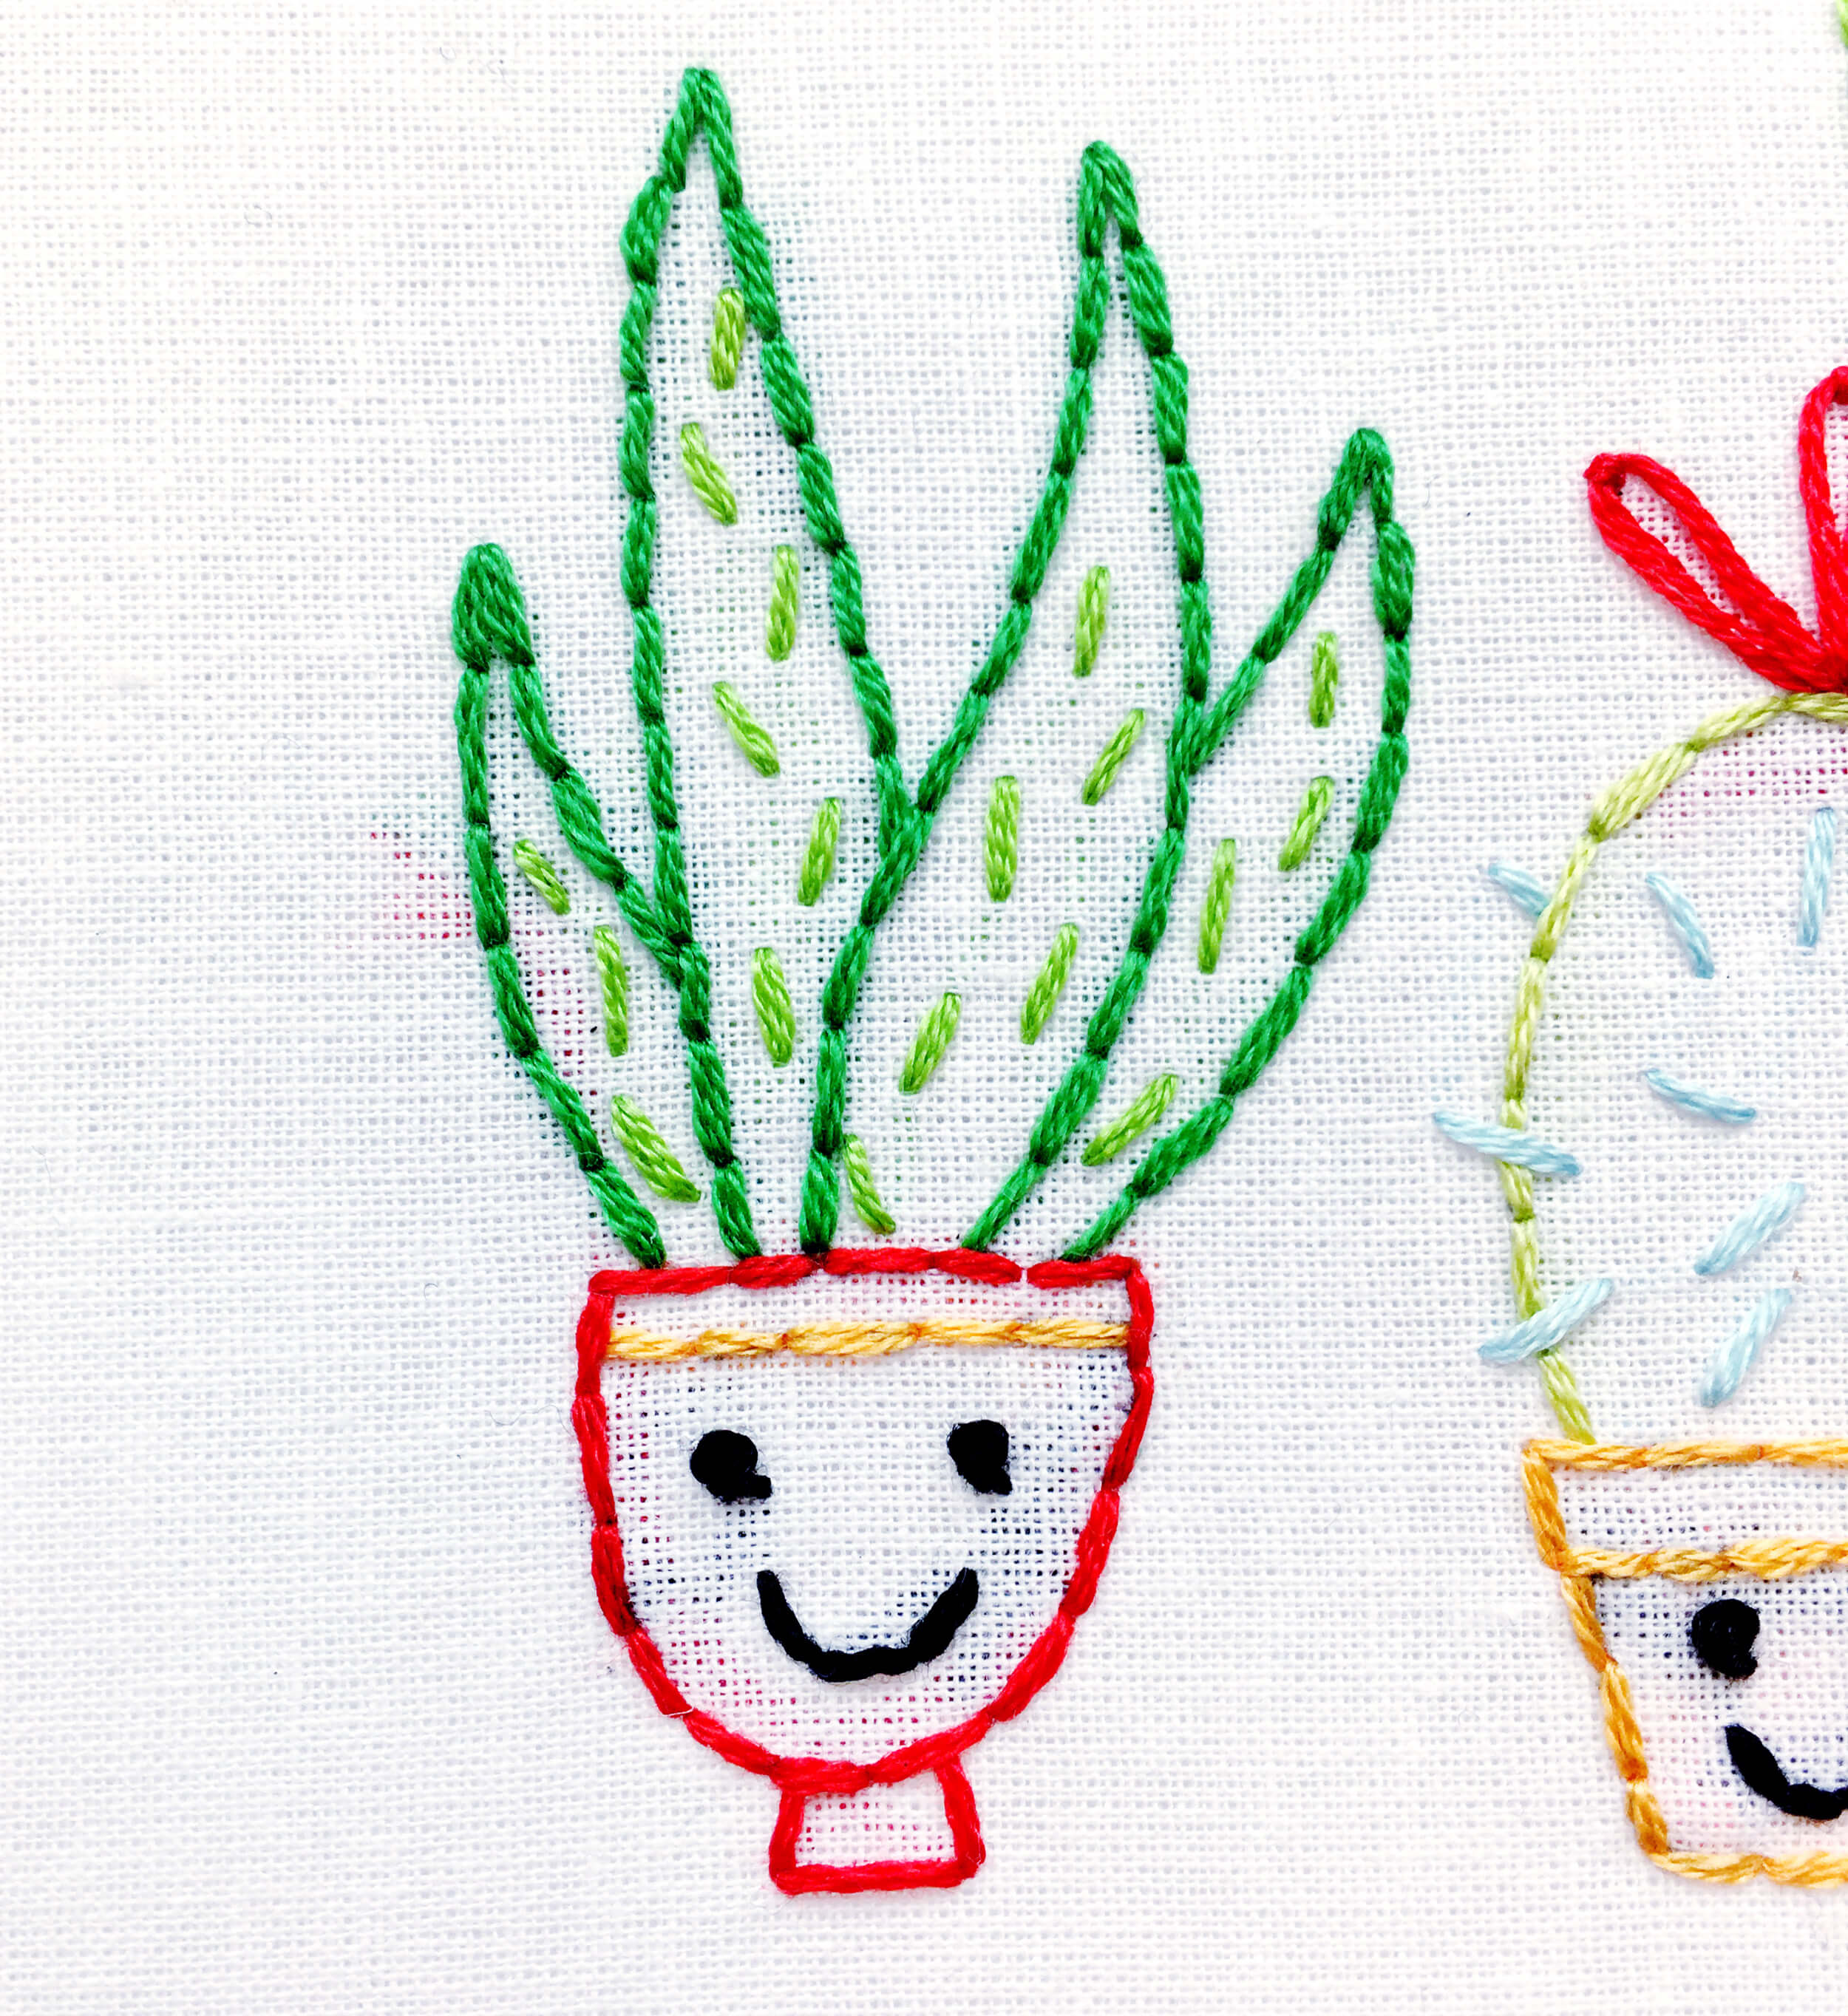 How to stitch perspective in an embroidery pattern